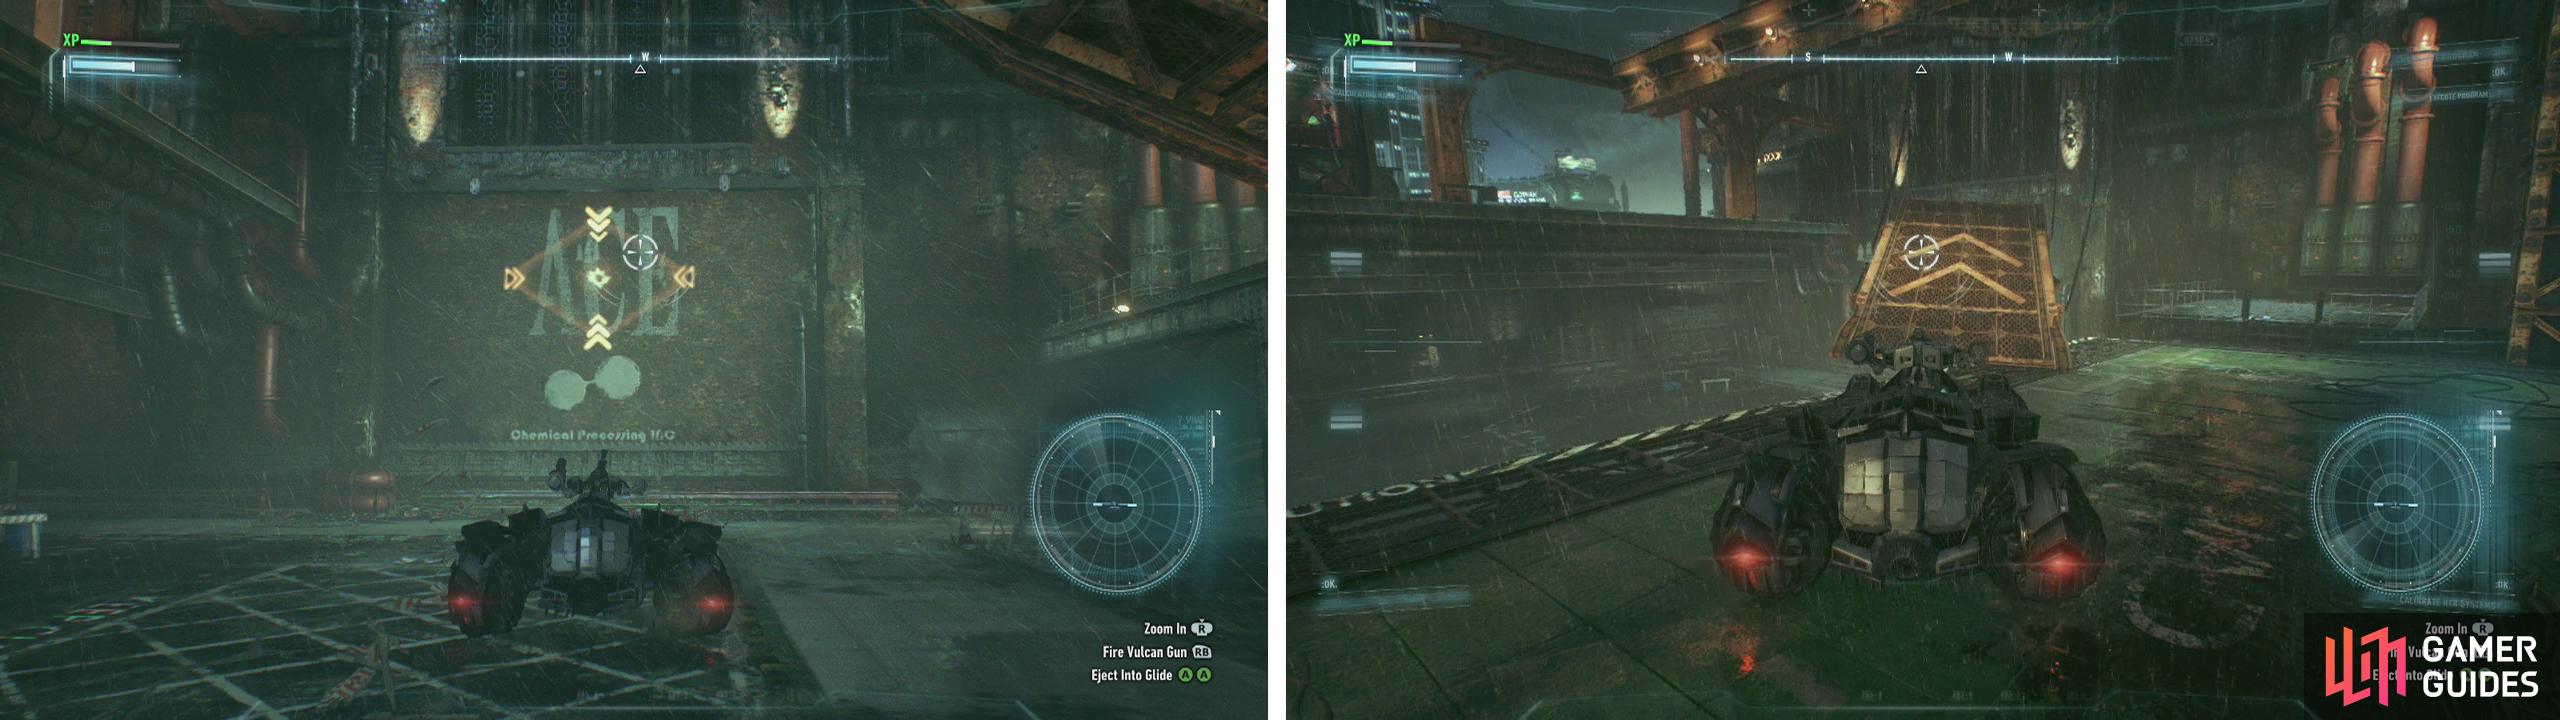 Shoot the weak wall (left). Then re-position the ramp (right) to jump into the hole.